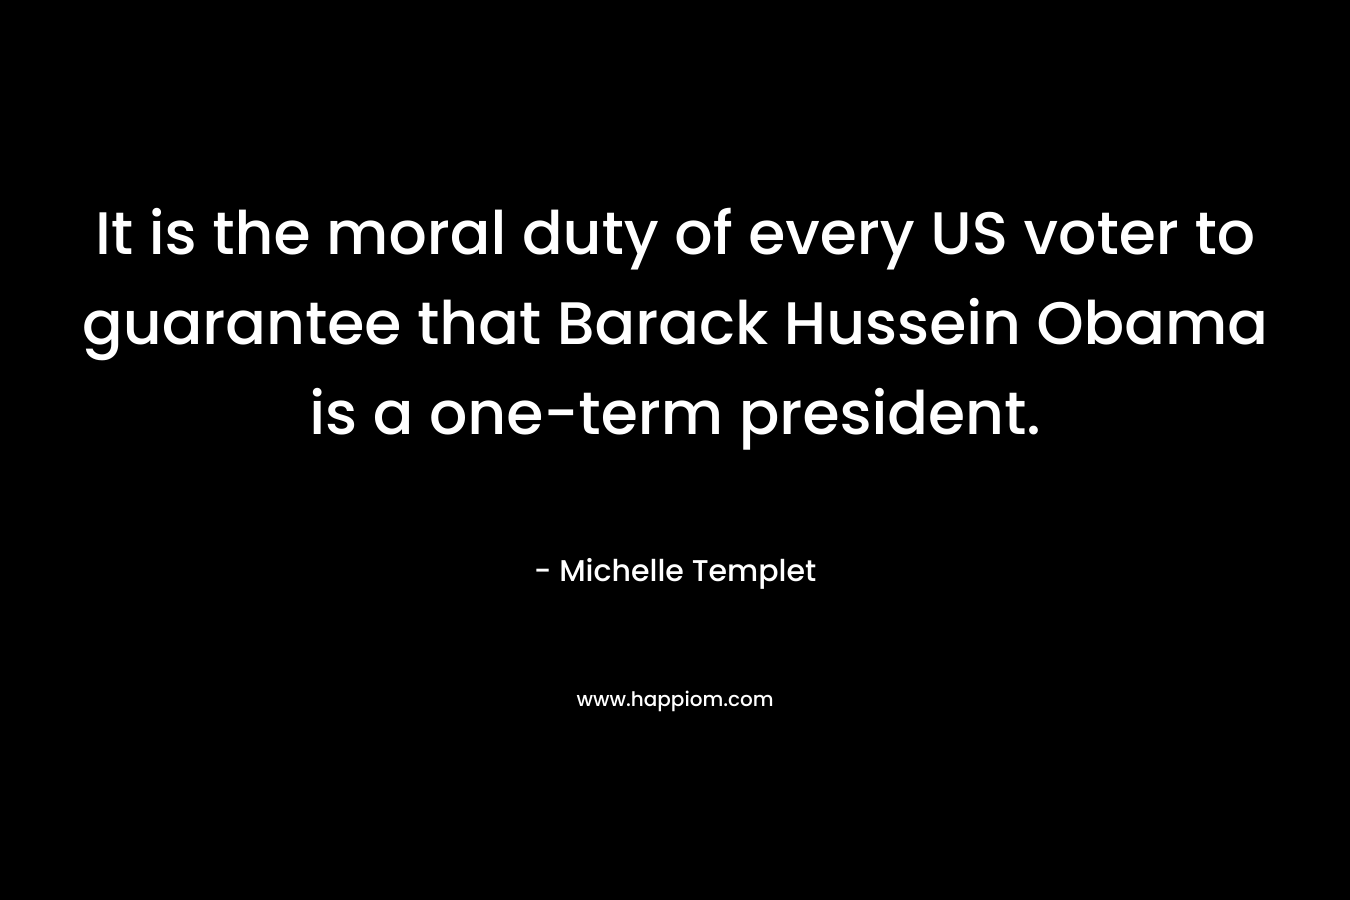 It is the moral duty of every US voter to guarantee that Barack Hussein Obama is a one-term president.